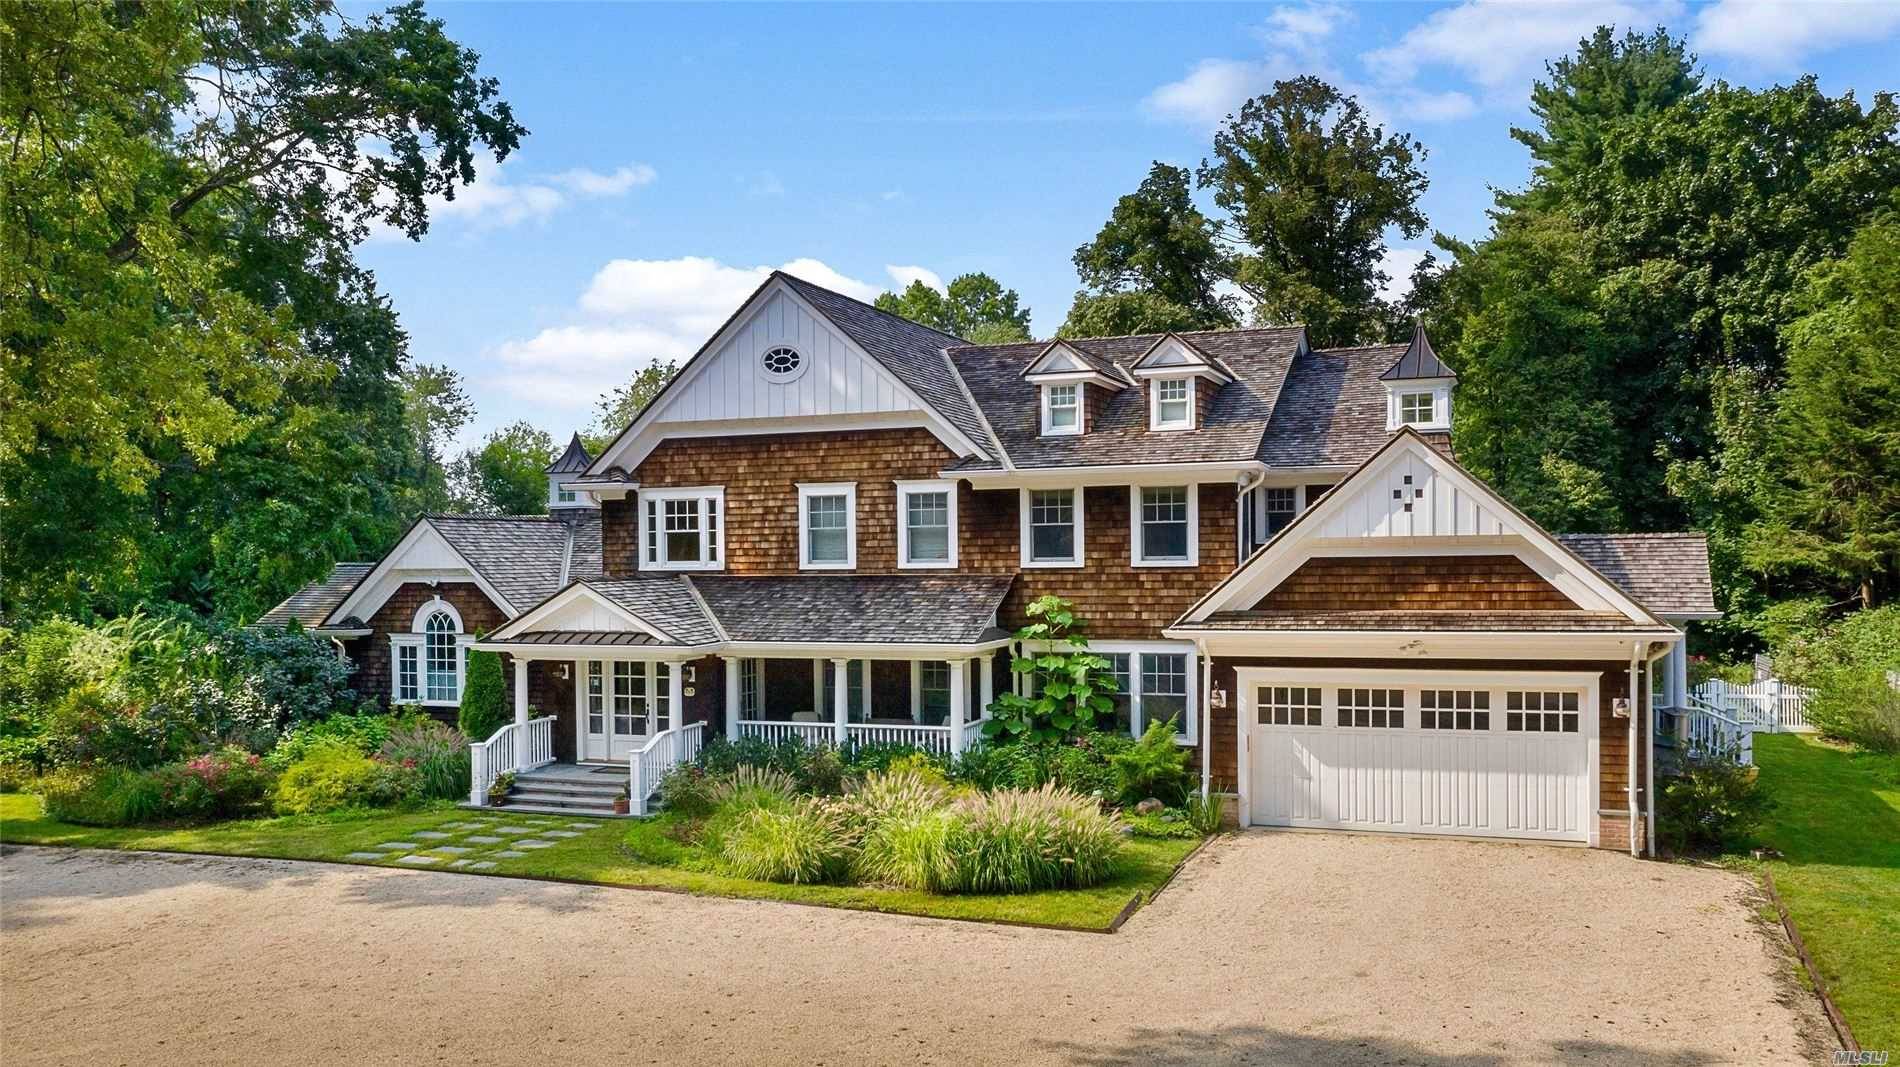 Stunning Hamptons style shingle home in the heart of Old Brookville, NY.